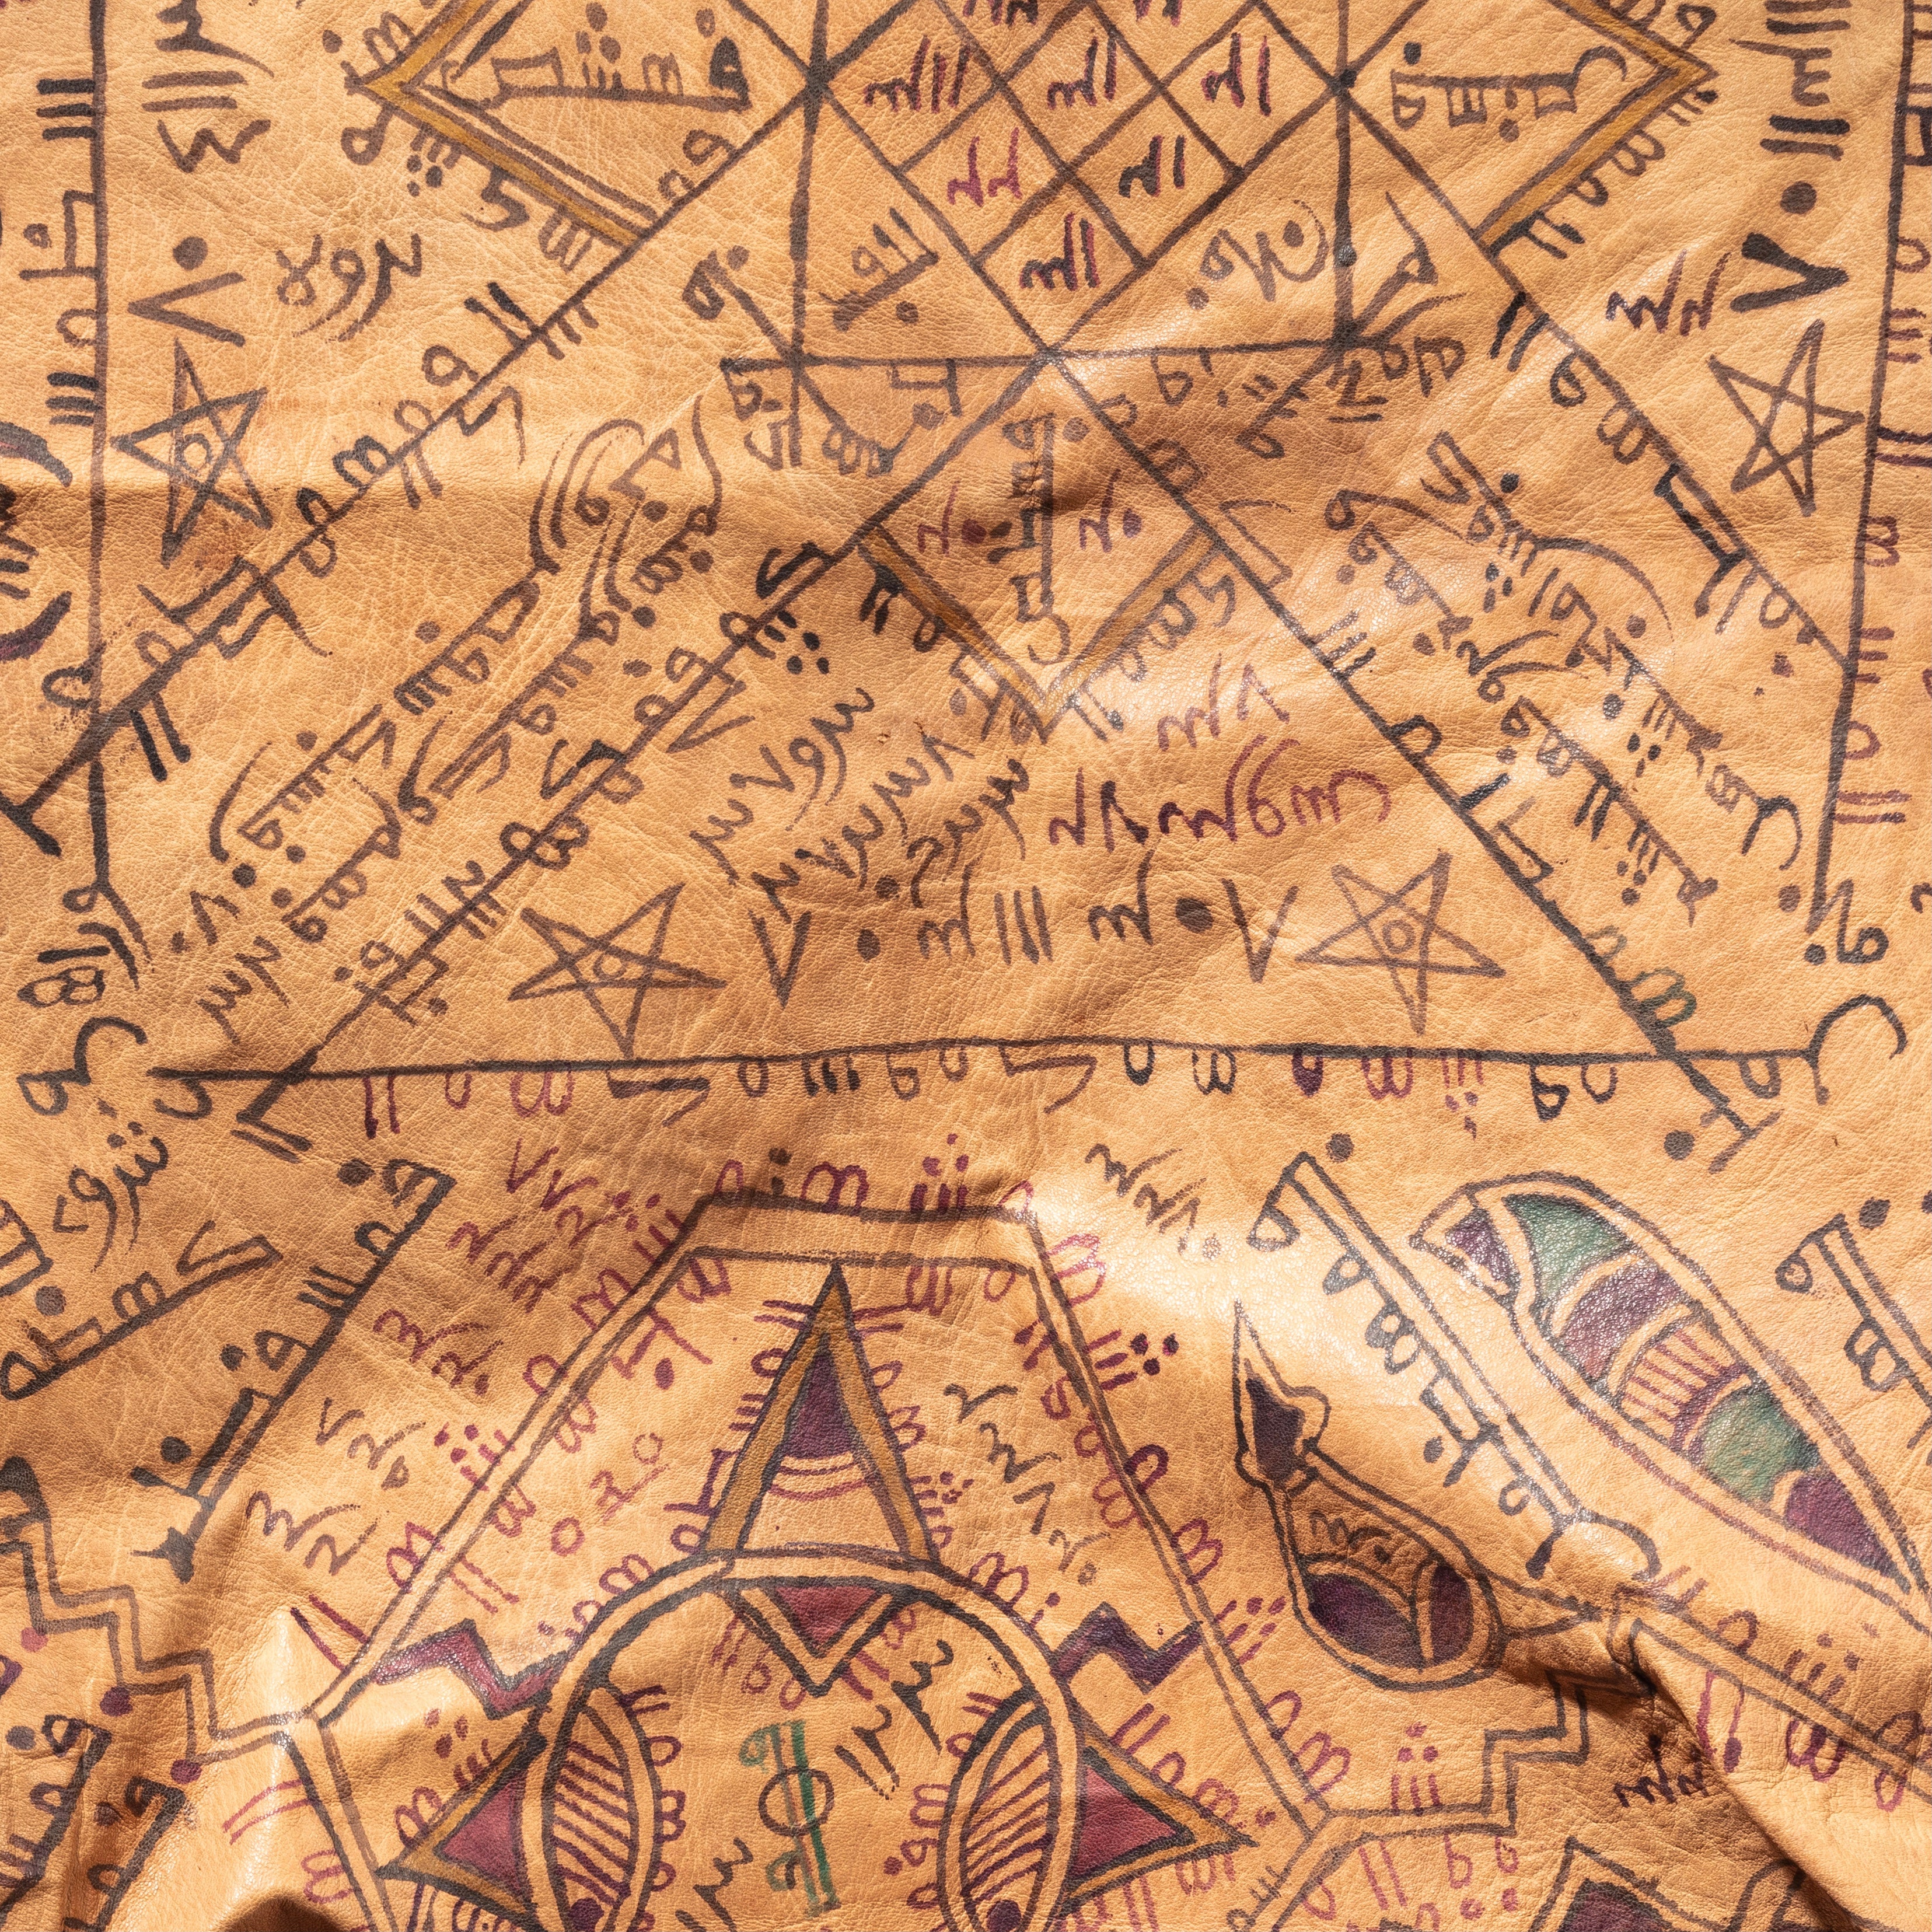 A MAGIC SQUARE WITH SCRIPT +DIAGRAMS ON LEATHER  HAUSA TRIBE OF NIGERIA (No 1823)